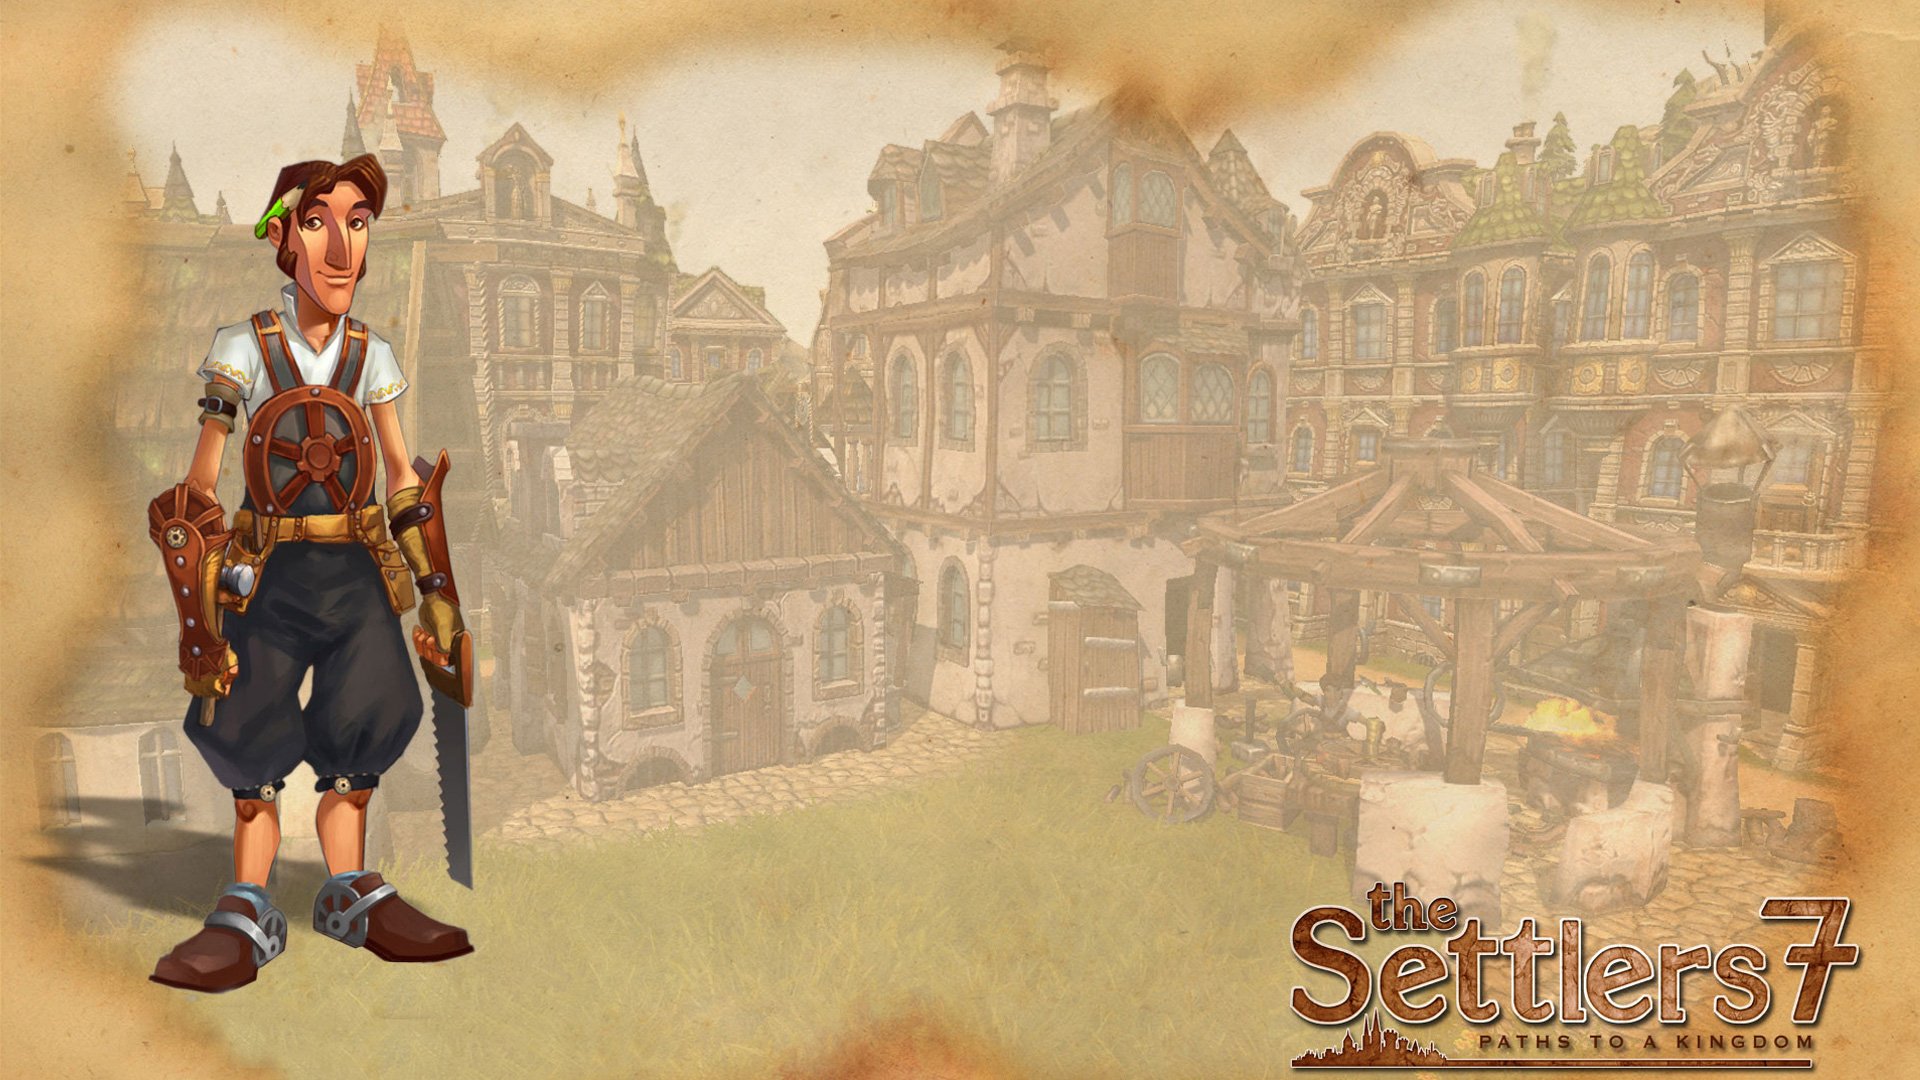 the settlers 7 paths to a kingdom steam download free